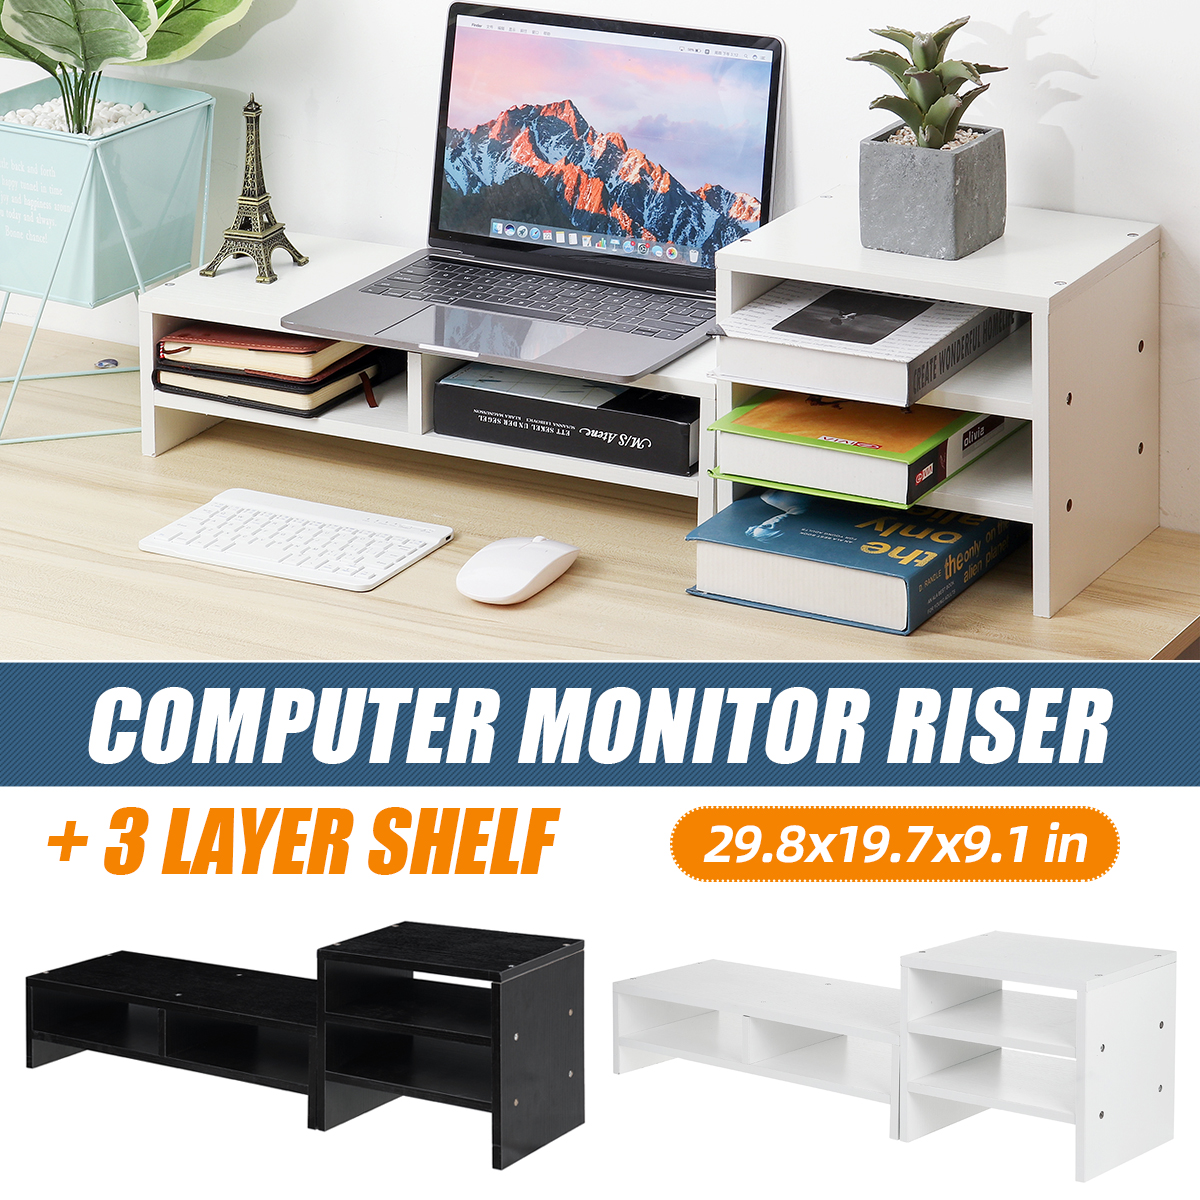 Computer-Monitor-Riser-Desktop-LED-LCD-Laptop-Monitor-Support-Stand-Desktop-Organizer-with-Storage-R-1794731-1